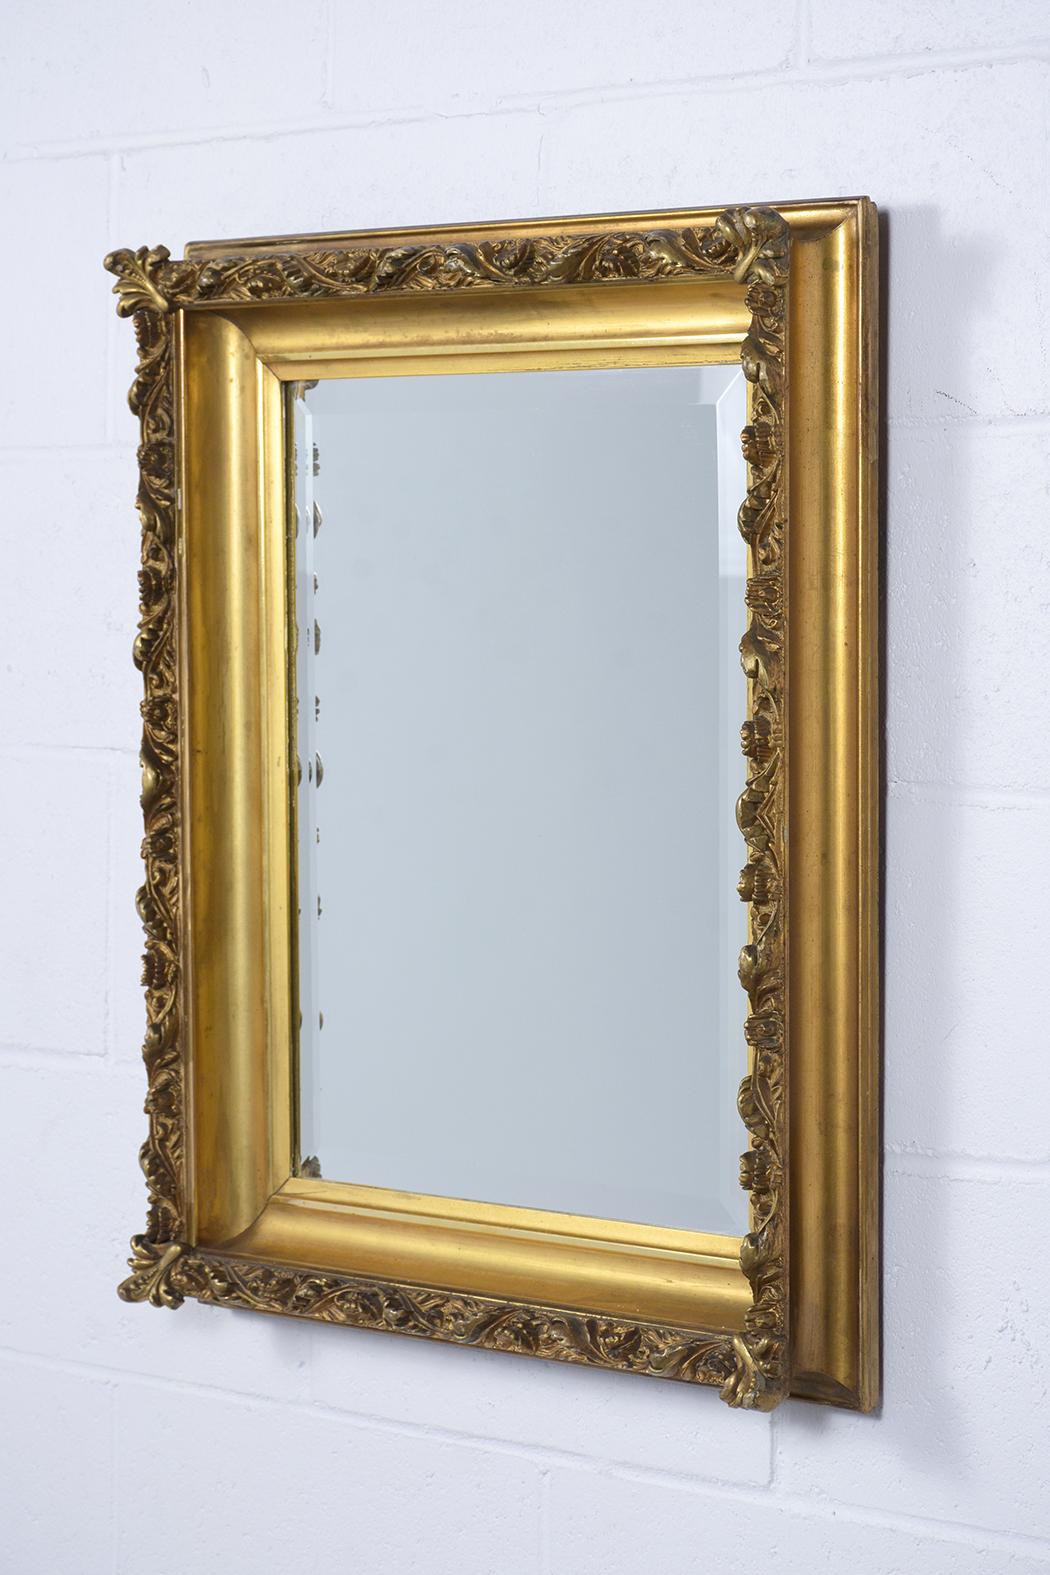 An extraordinary Antique French Henry II Wall Mirror features a giltwood carved frame and rectangular bevel mirror in the center that is fully reflective. This elegant Late 19th-Century Gilt Mirror is ready to be used and displayed for years to